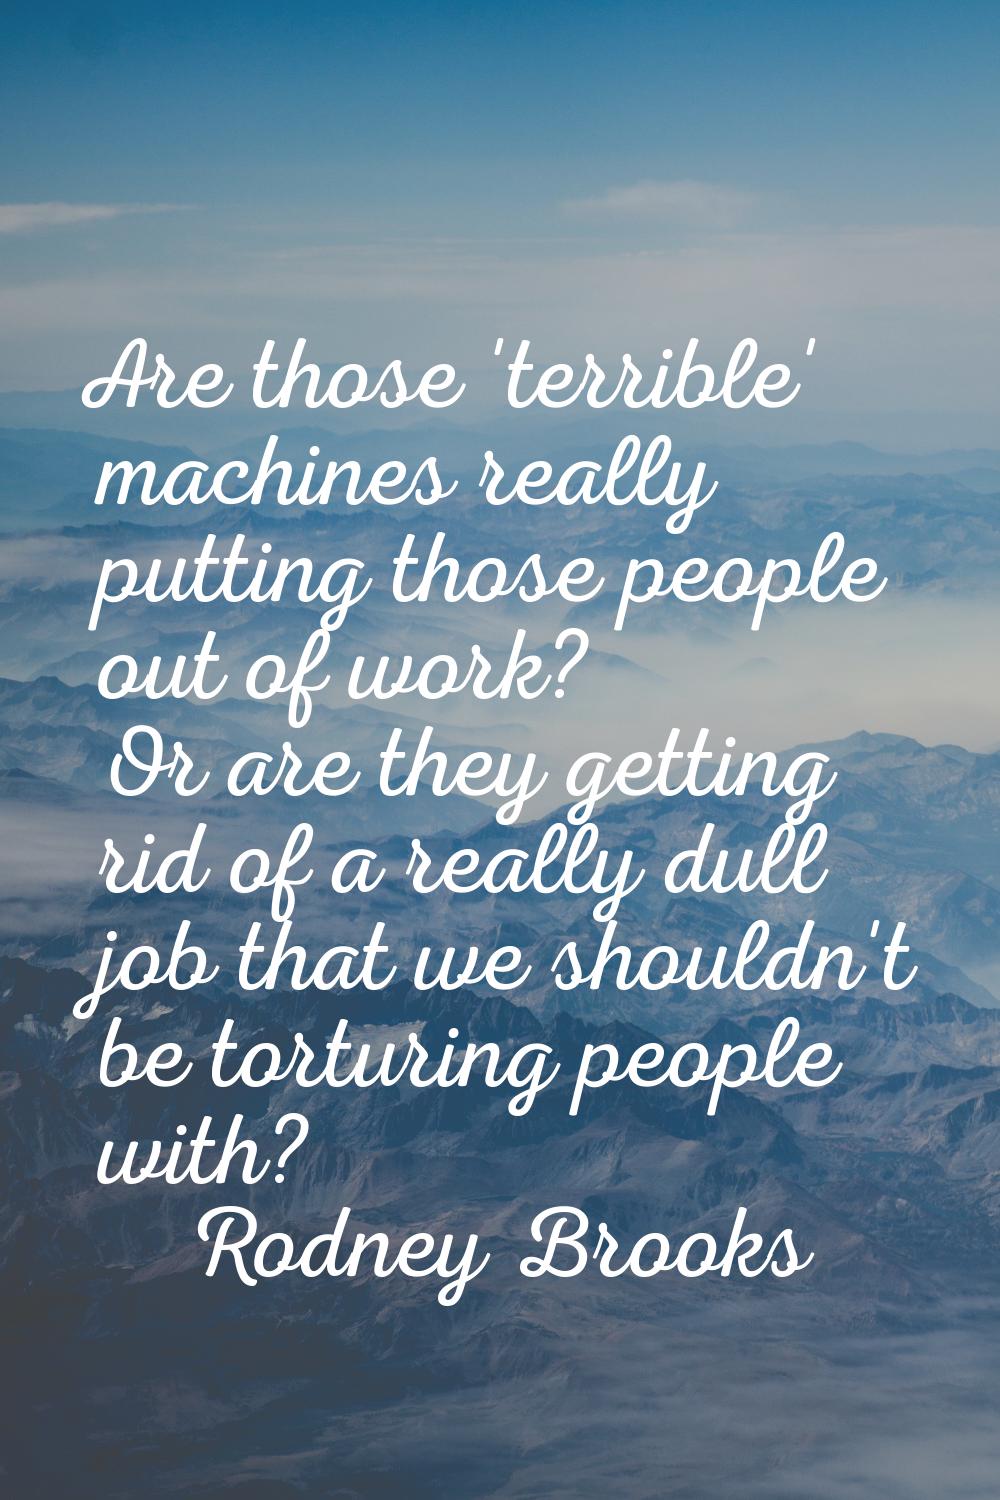 Are those 'terrible' machines really putting those people out of work? Or are they getting rid of a